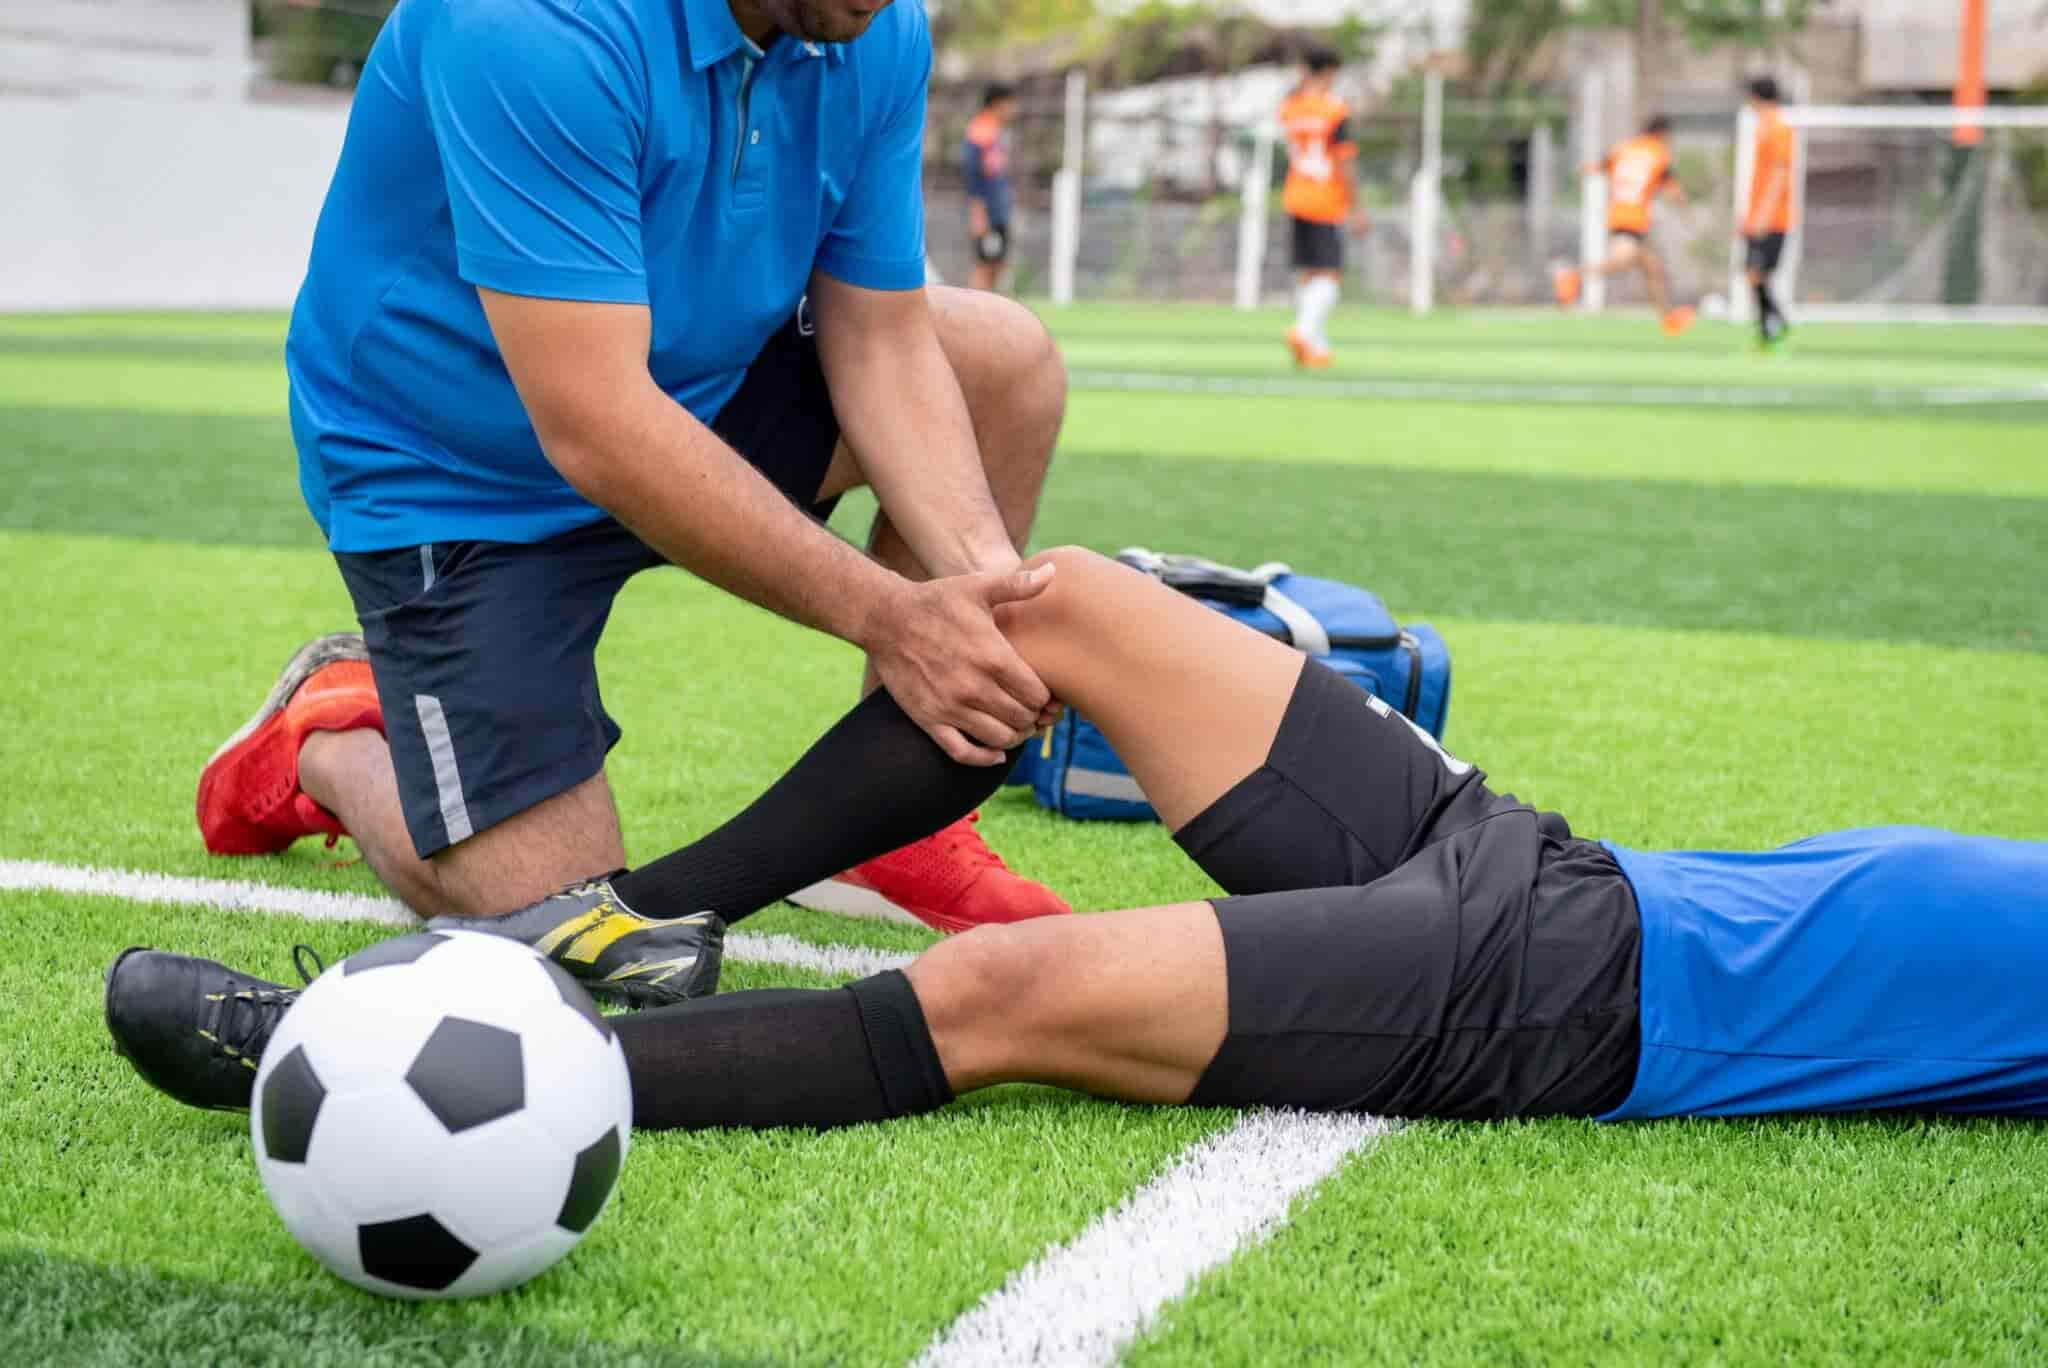 Football Injuries: Prevention & Treatment